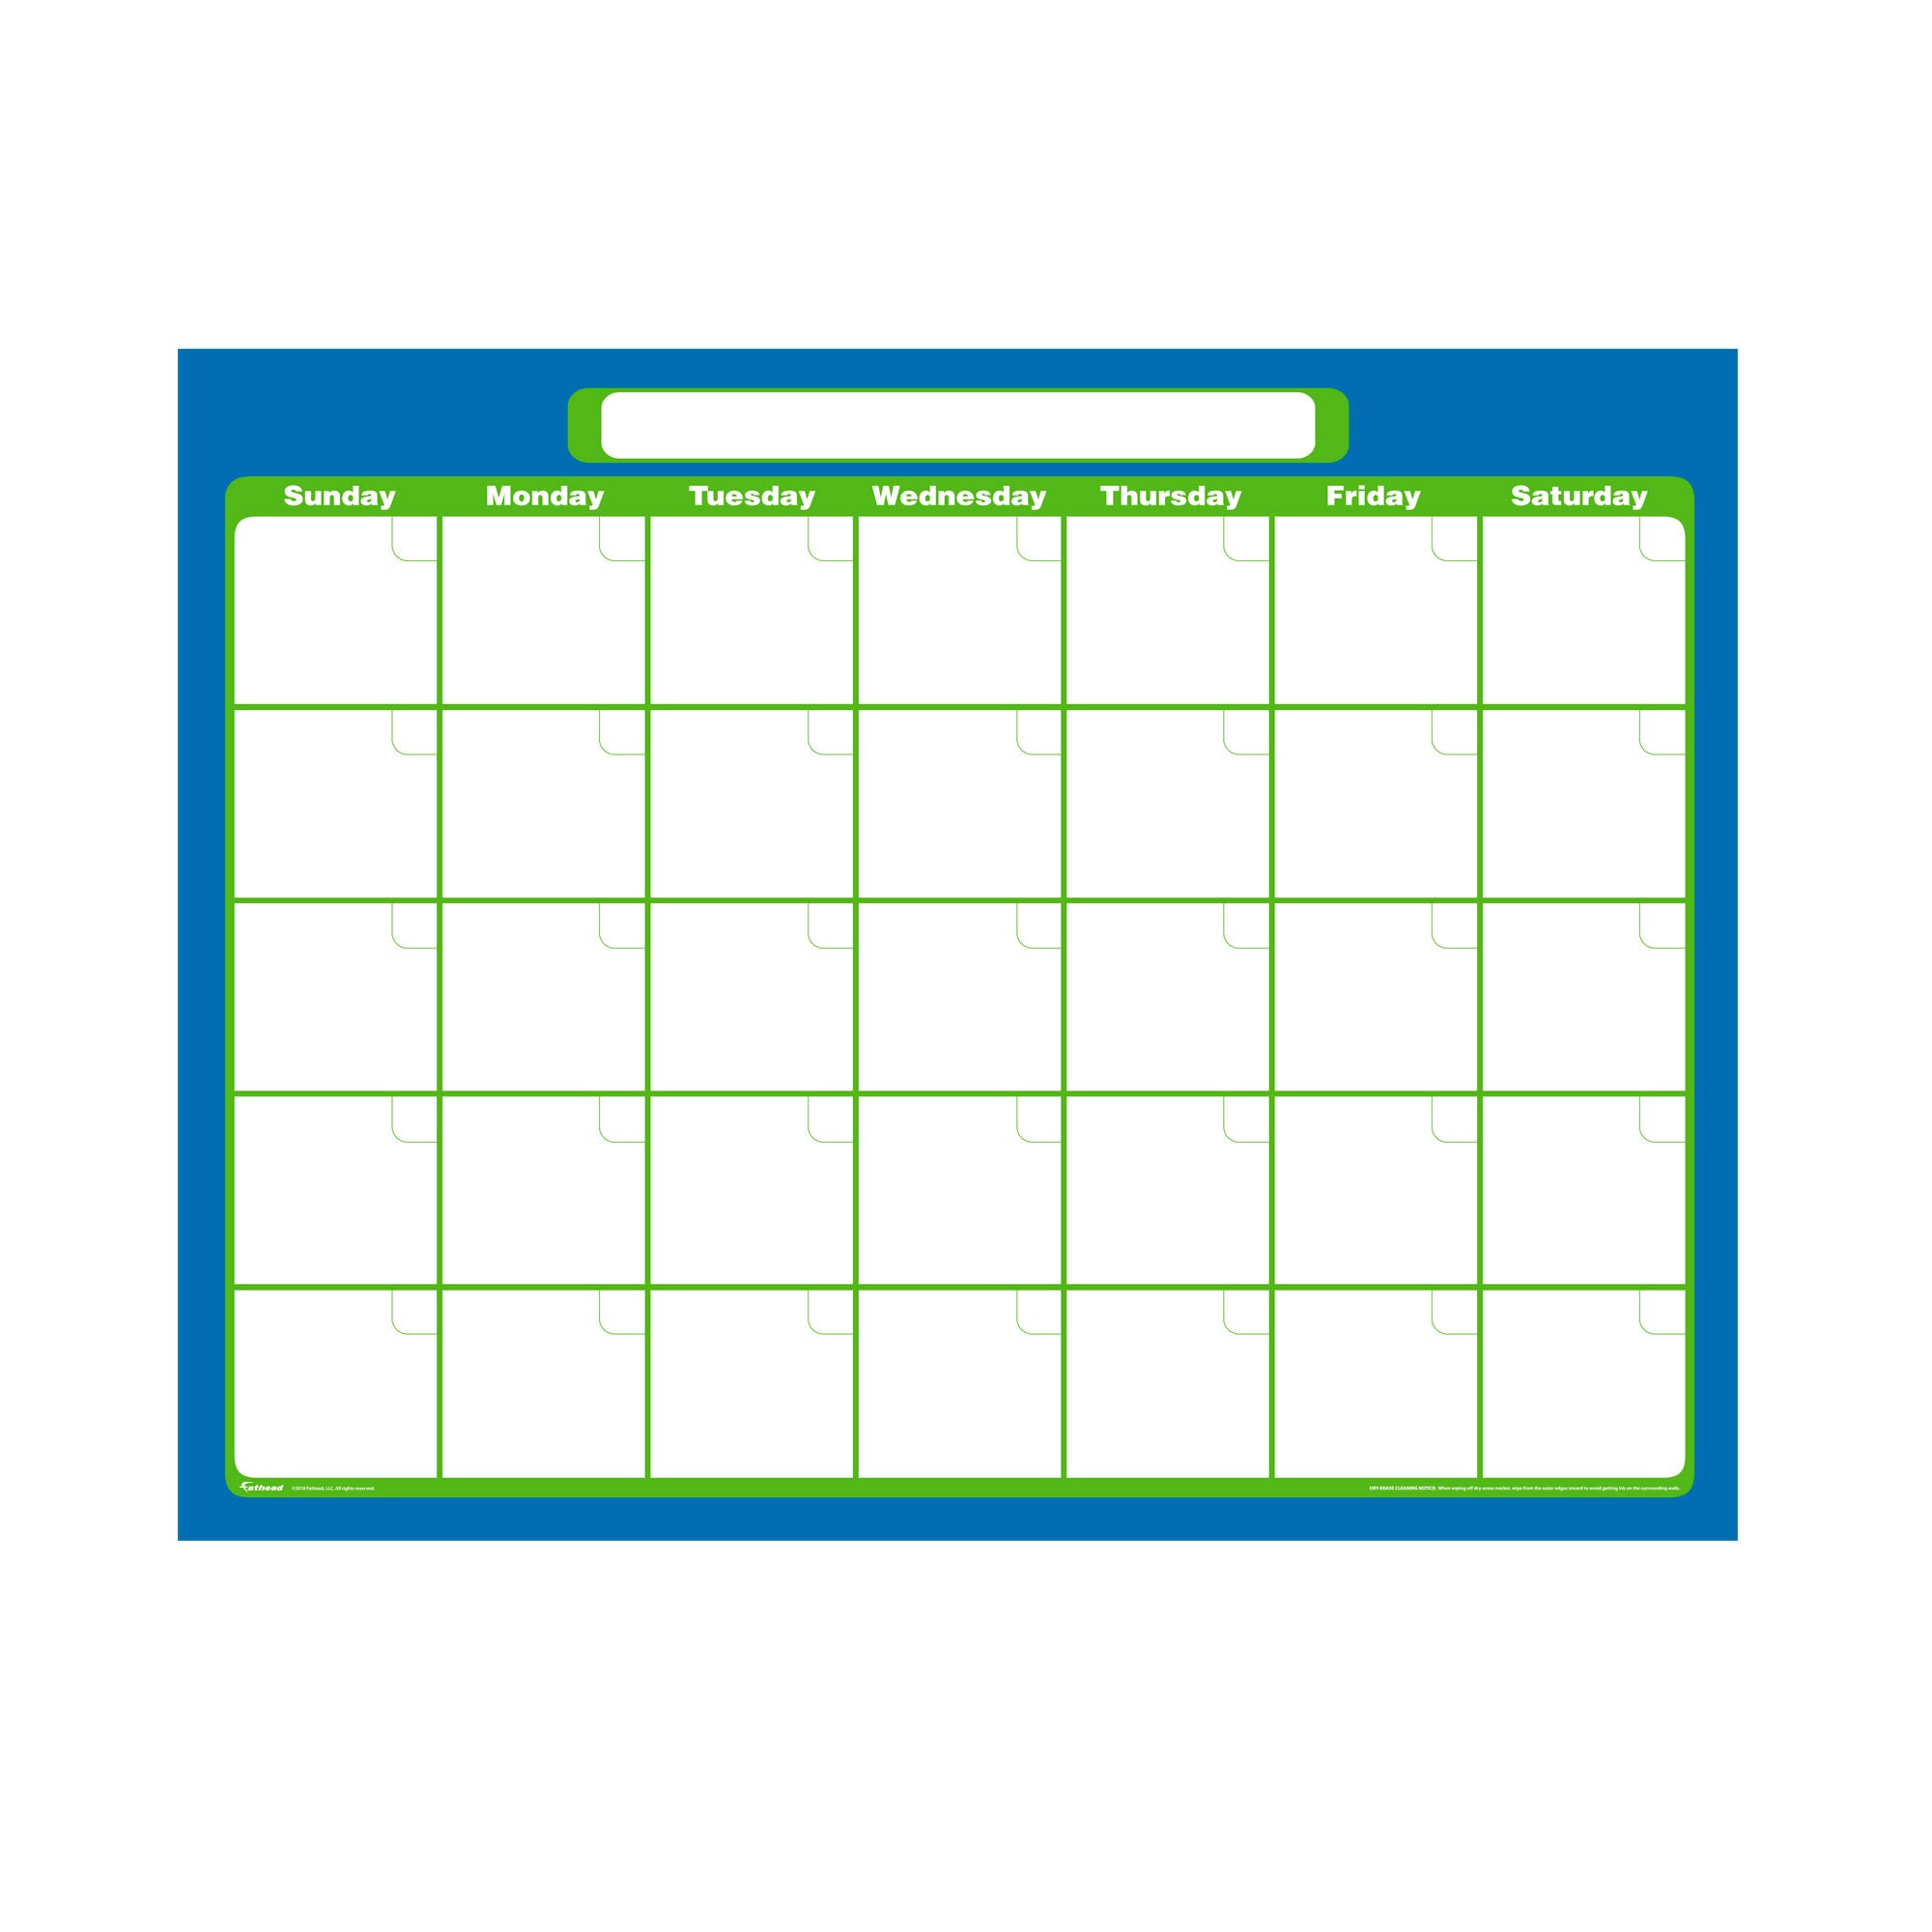 One Month Calendar Dry Erase Removable Wall Adhesive Decal in Orange/Royal Blue 27"W x 39.5"H by Fathead | Vinyl